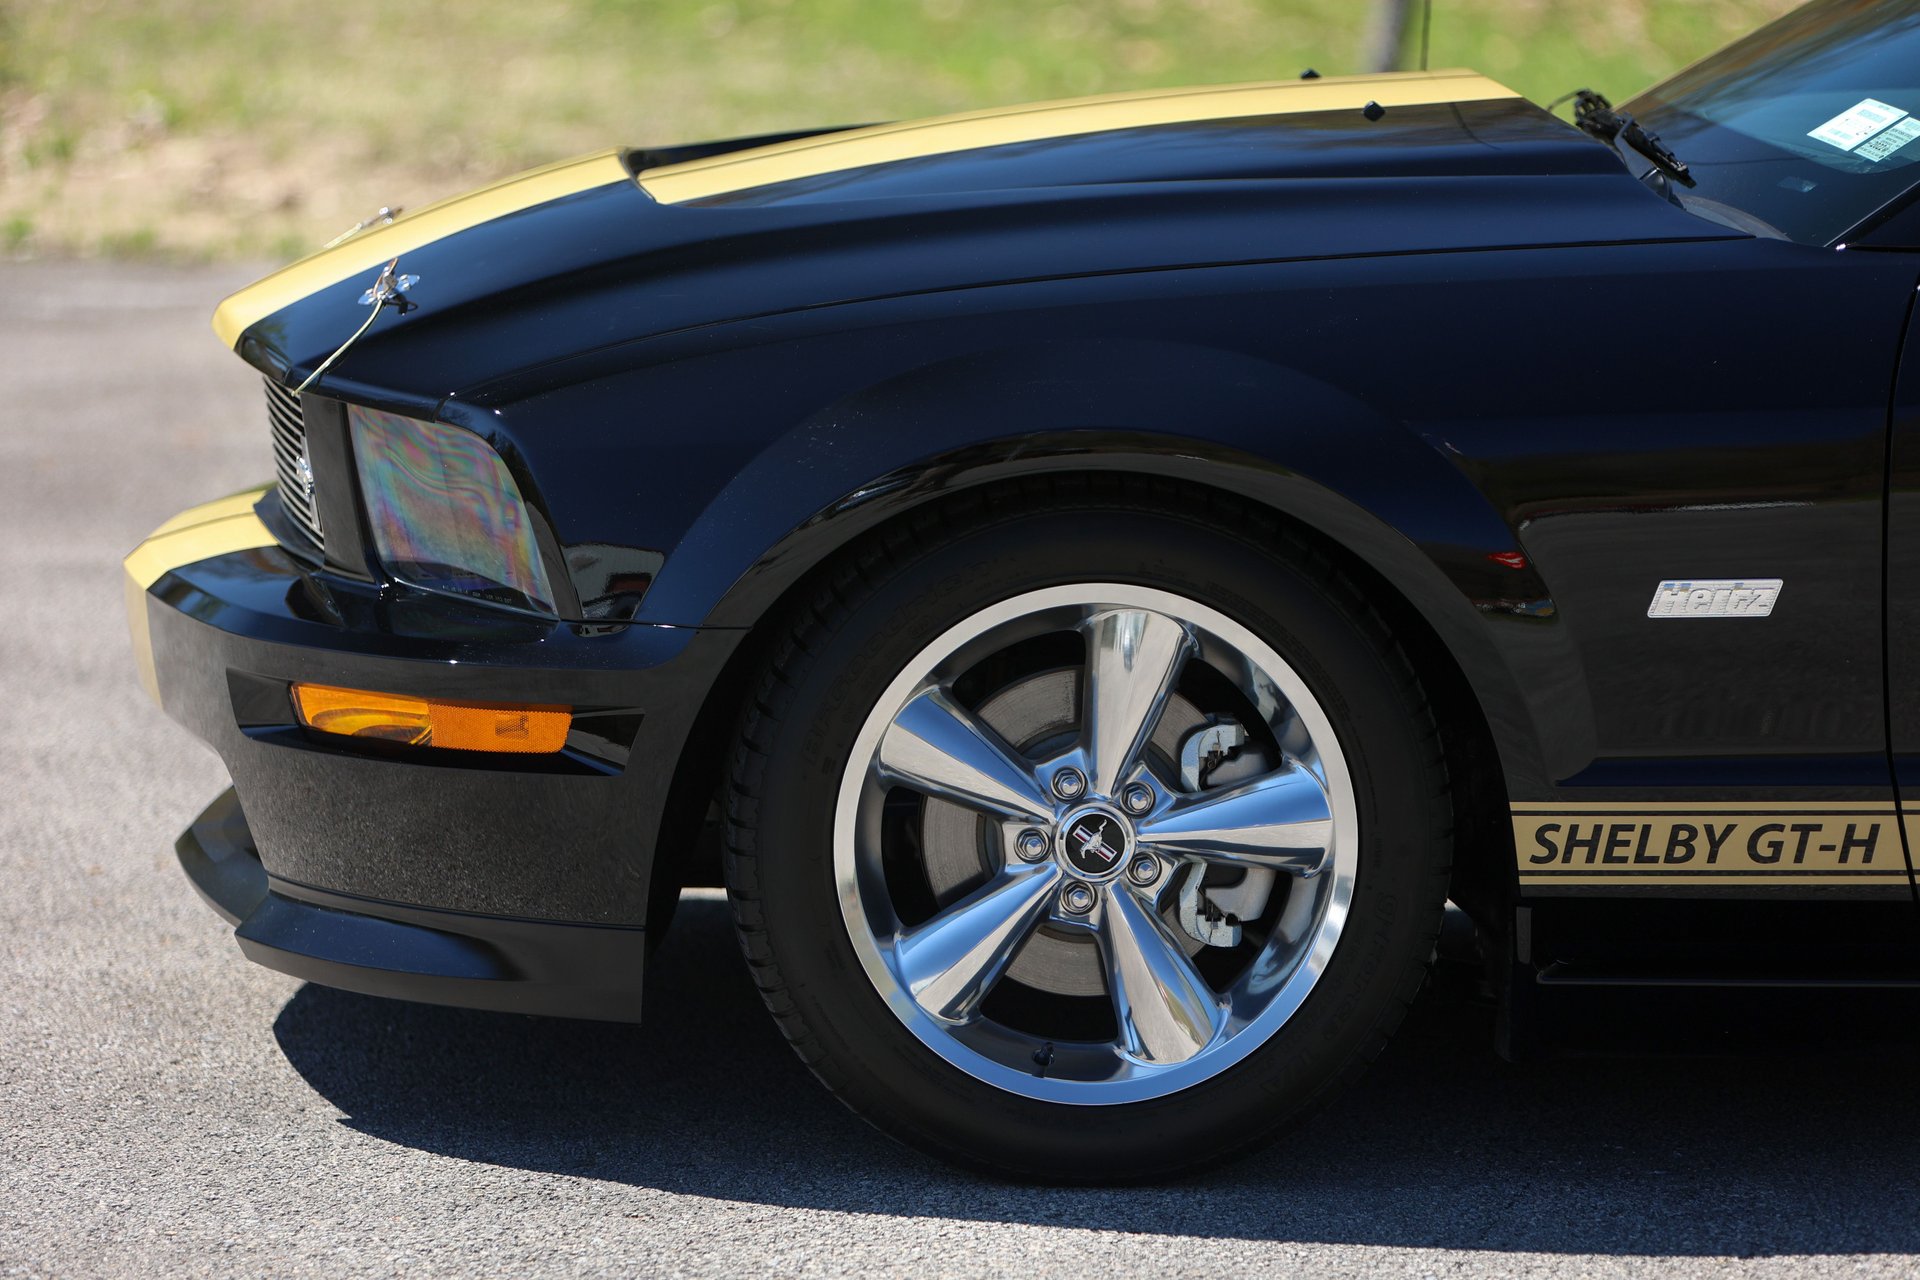 For Sale 2006 Ford Shelby Mustang GT-H Coupe 'Executive Car'